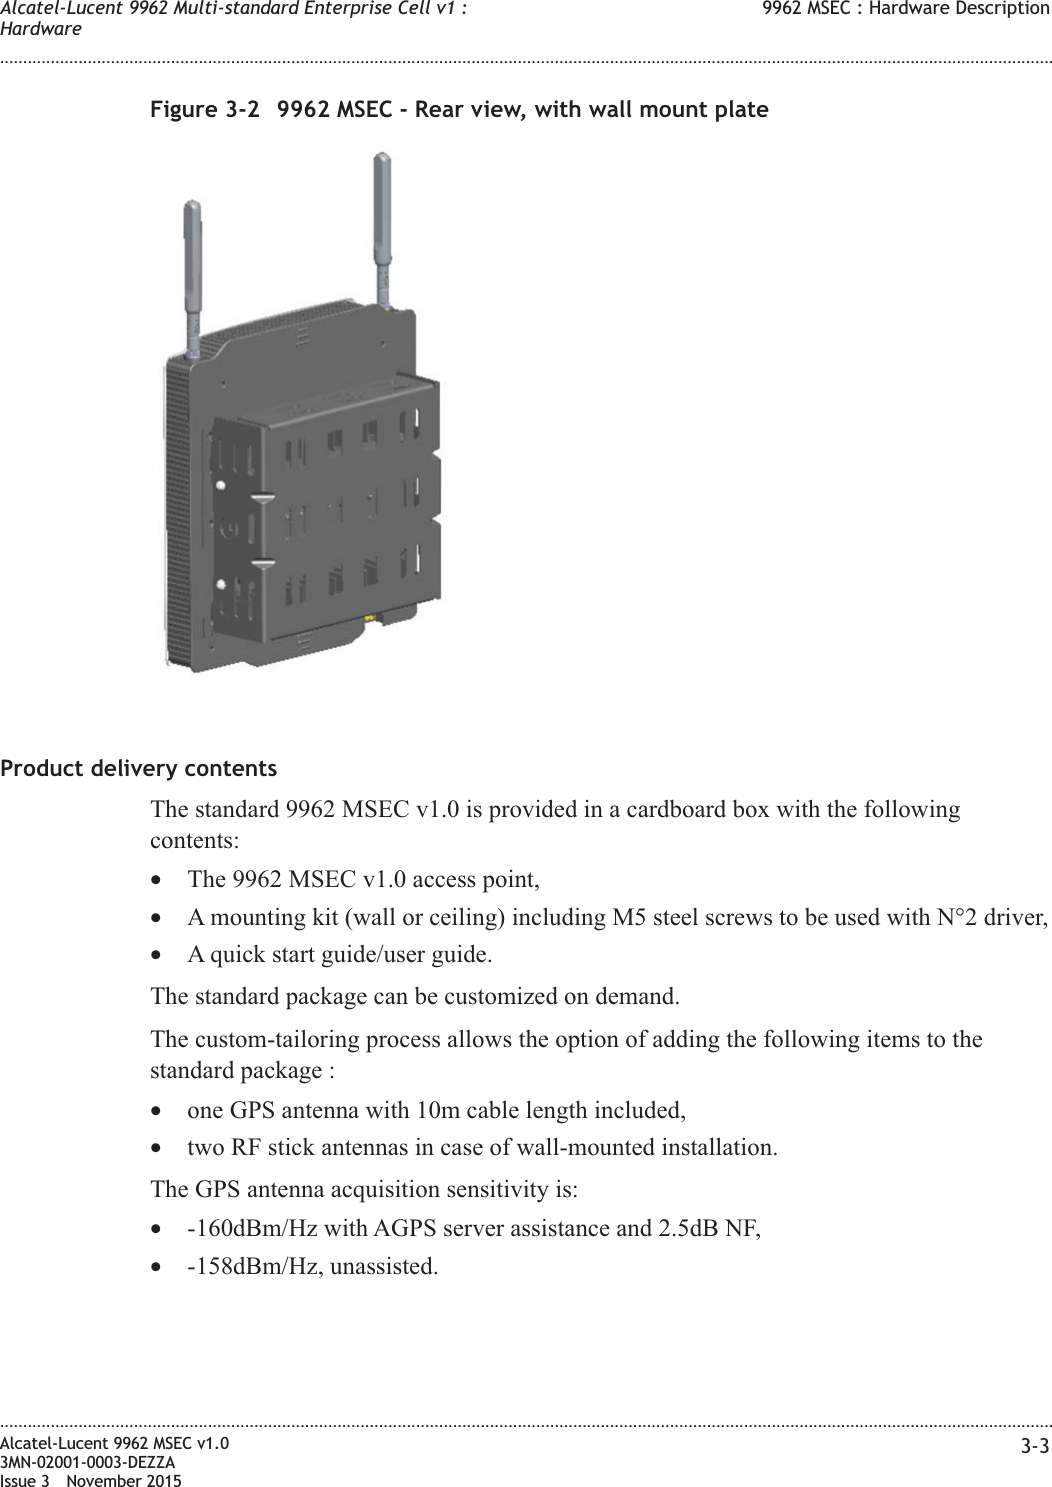 Product delivery contentsThe standard 9962 MSEC v1.0 is provided in a cardboard box with the followingcontents:•The 9962 MSEC v1.0 access point,•A mounting kit (wall or ceiling) including M5 steel screws to be used with N°2 driver,•A quick start guide/user guide.The standard package can be customized on demand.The custom-tailoring process allows the option of adding the following items to thestandard package :•one GPS antenna with 10m cable length included,•two RF stick antennas in case of wall-mounted installation.The GPS antenna acquisition sensitivity is:•-160dBm/Hz with AGPS server assistance and 2.5dB NF,•-158dBm/Hz, unassisted.Figure 3-2 9962 MSEC - Rear view, with wall mount plateAlcatel-Lucent 9962 Multi-standard Enterprise Cell v1 :Hardware9962 MSEC : Hardware Description........................................................................................................................................................................................................................................................................................................................................................................................................................................................................Alcatel-Lucent 9962 MSEC v1.03MN-02001-0003-DEZZAIssue 3 November 20153-3